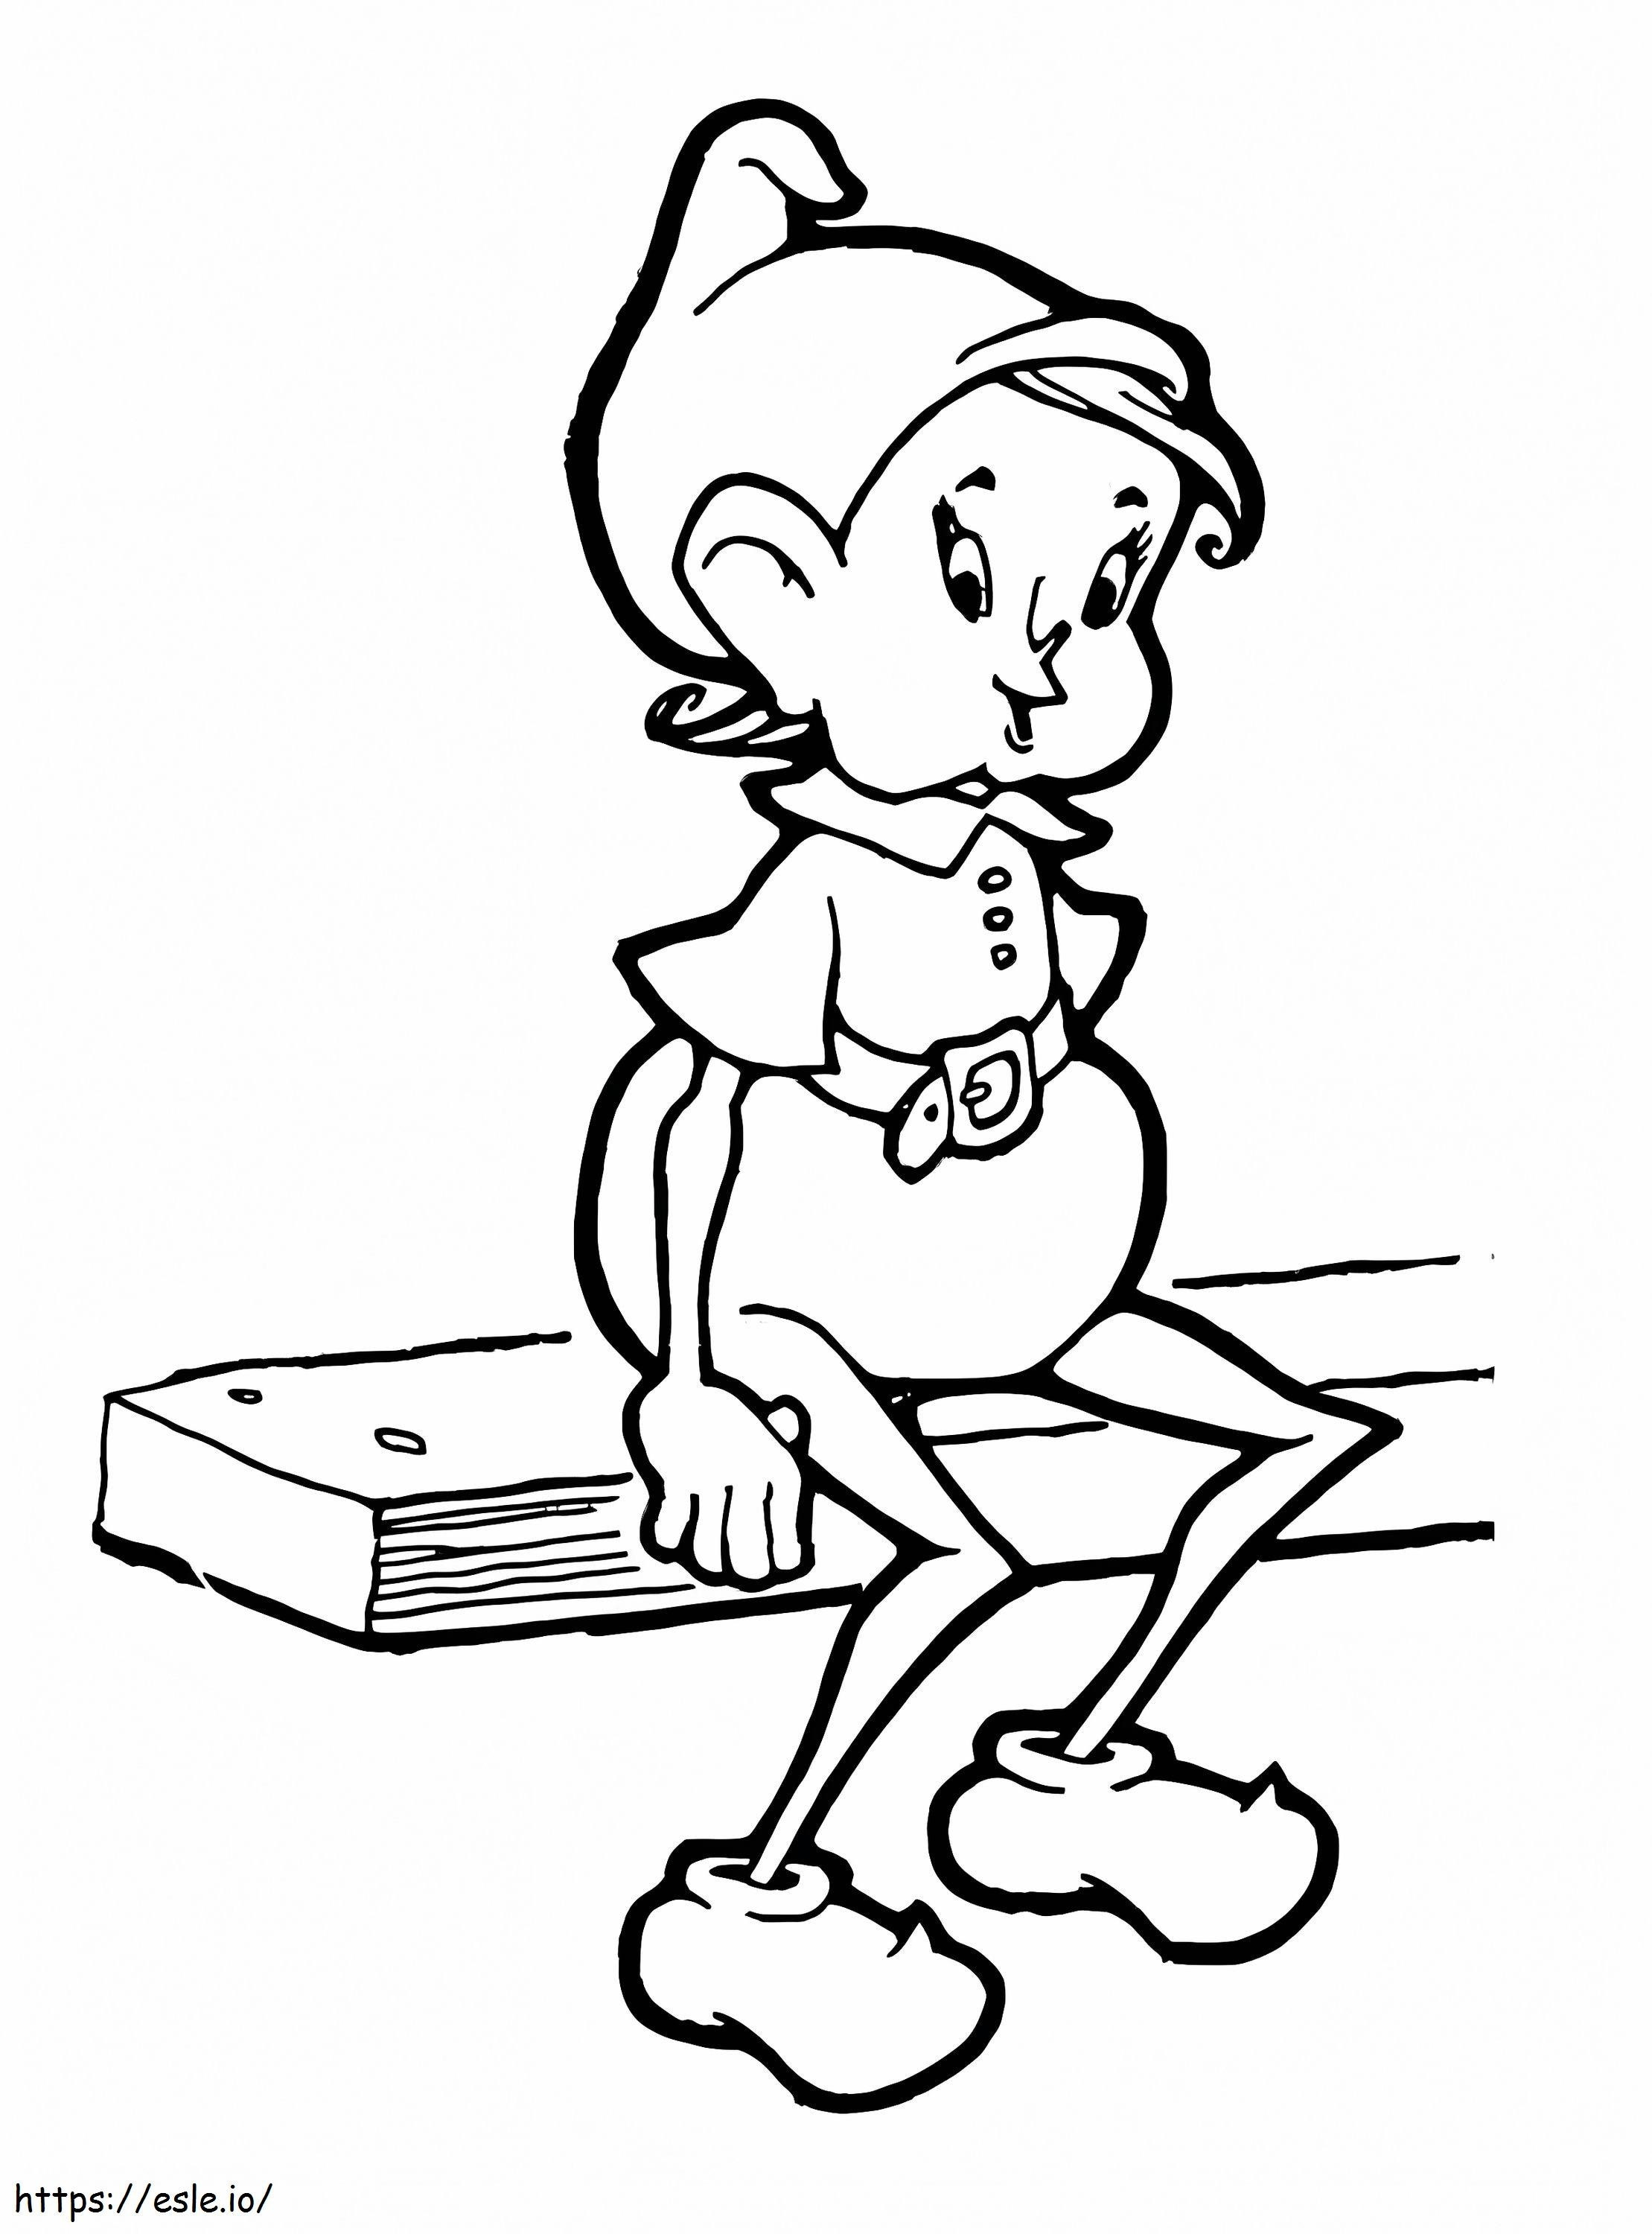 Elf On The Shelf Sitting coloring page